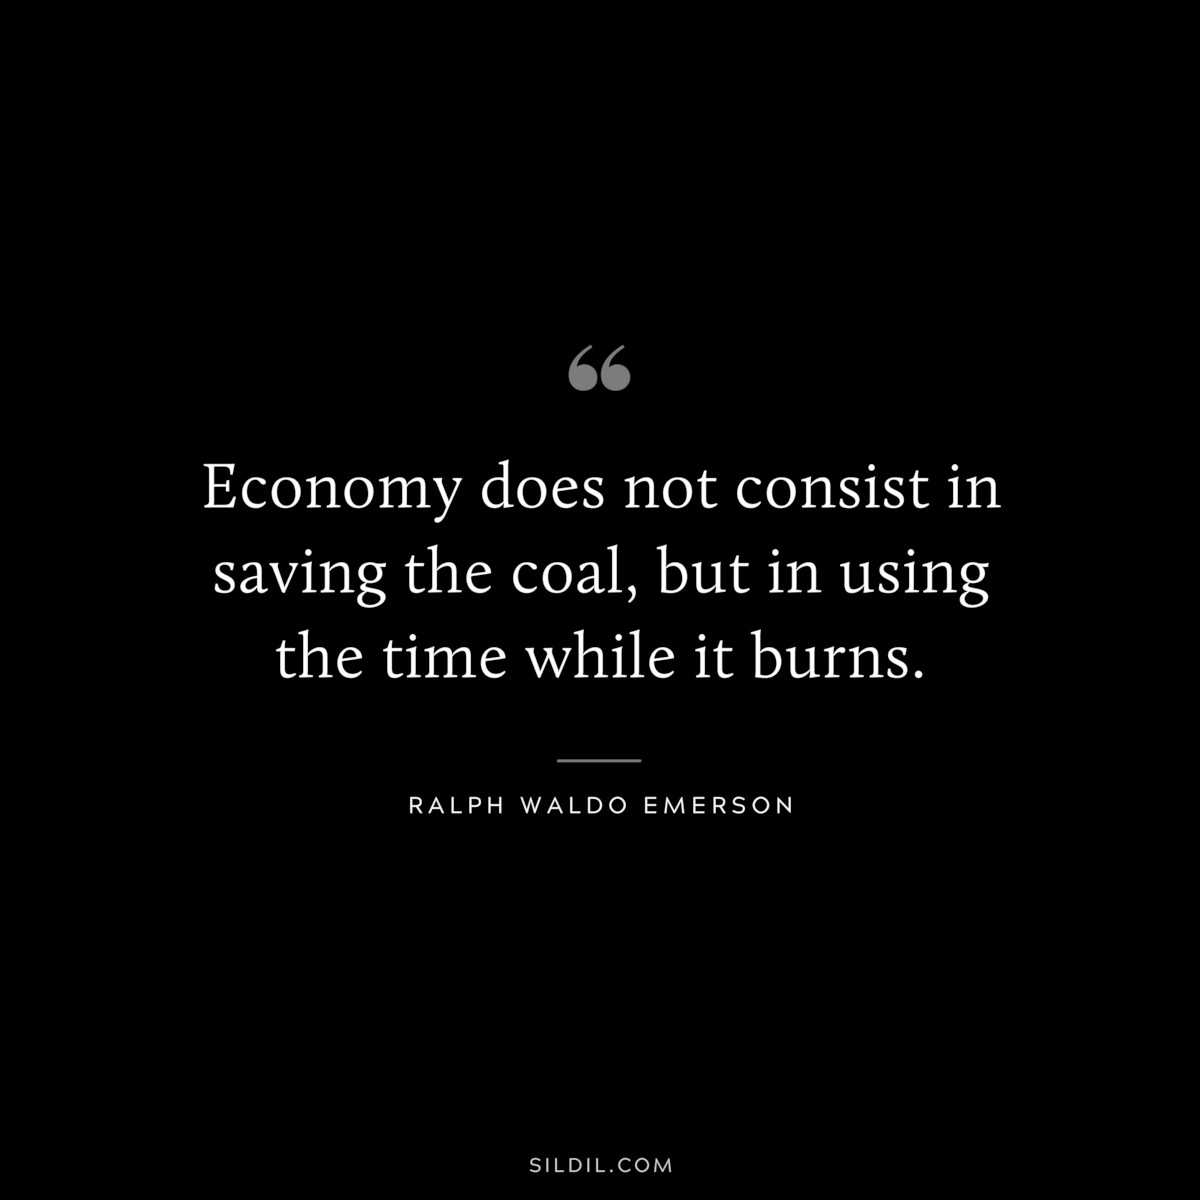 Economy does not consist in saving the coal, but in using the time while it burns. — Ralph Waldo Emerson